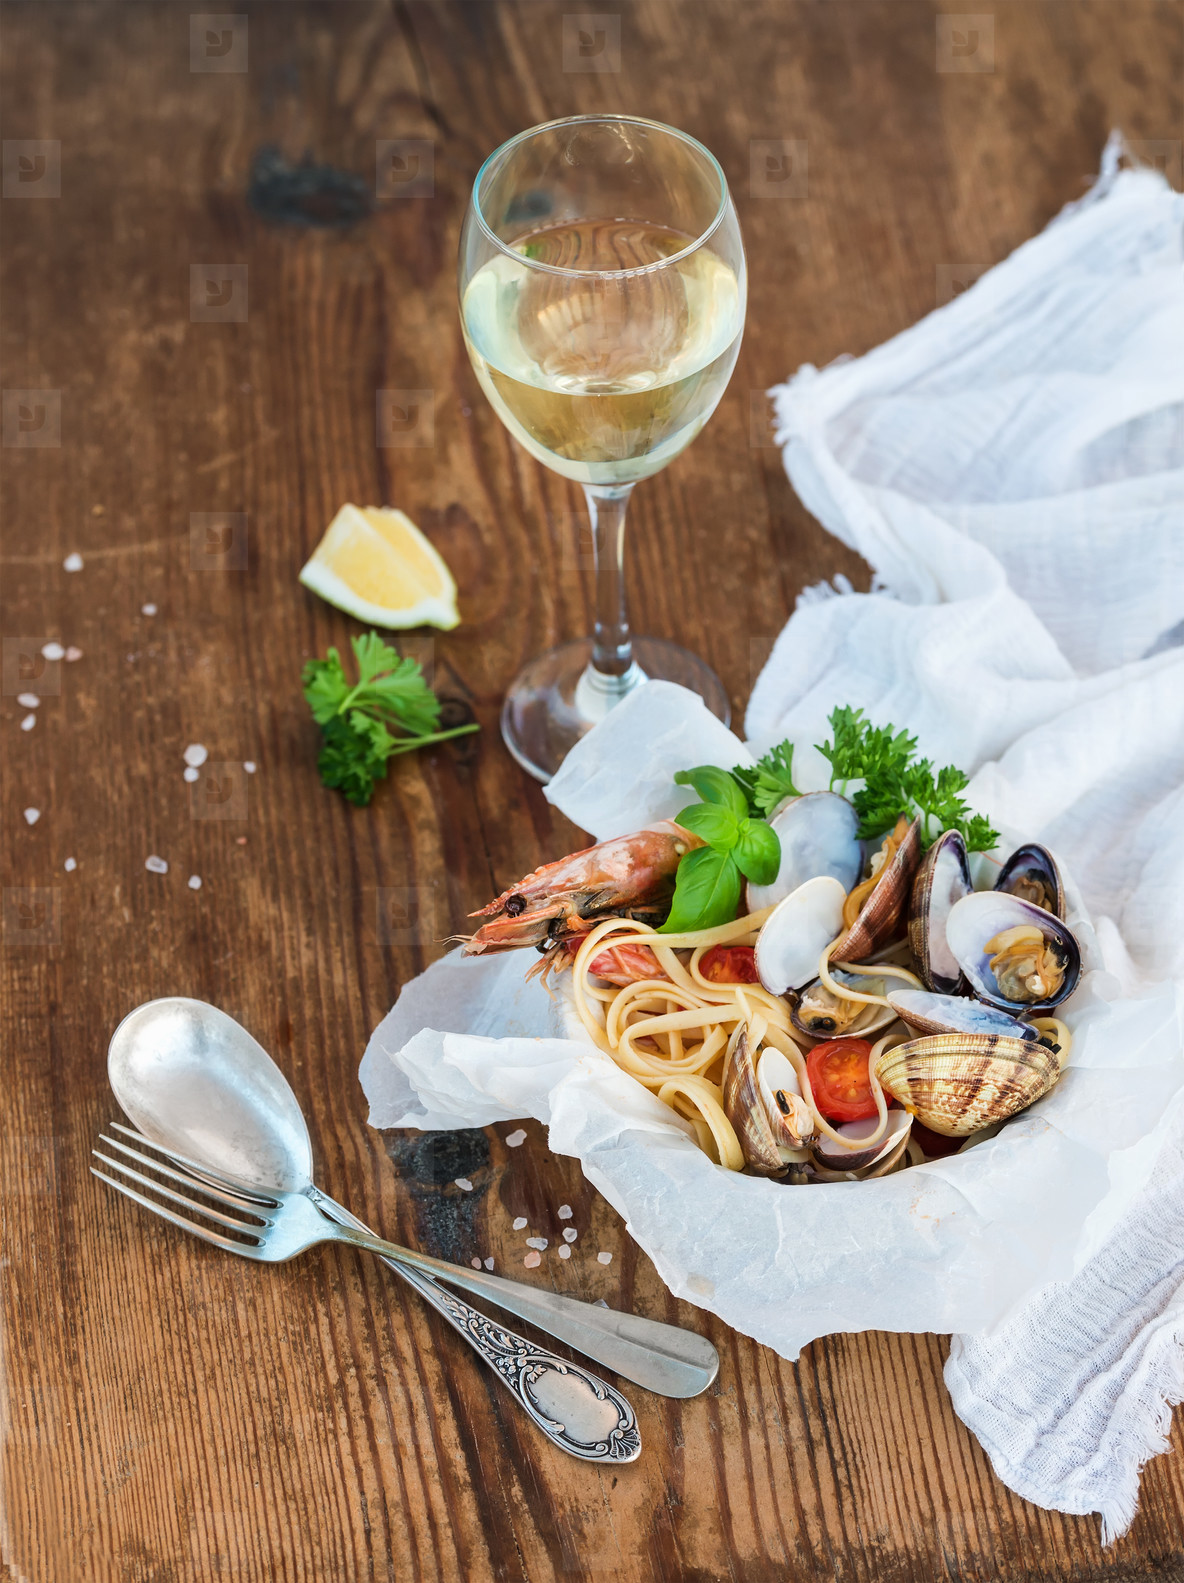 Seafood pasta. Spaghetti with clams and shrimps in bowl, glass of white wine over rustic wood background.